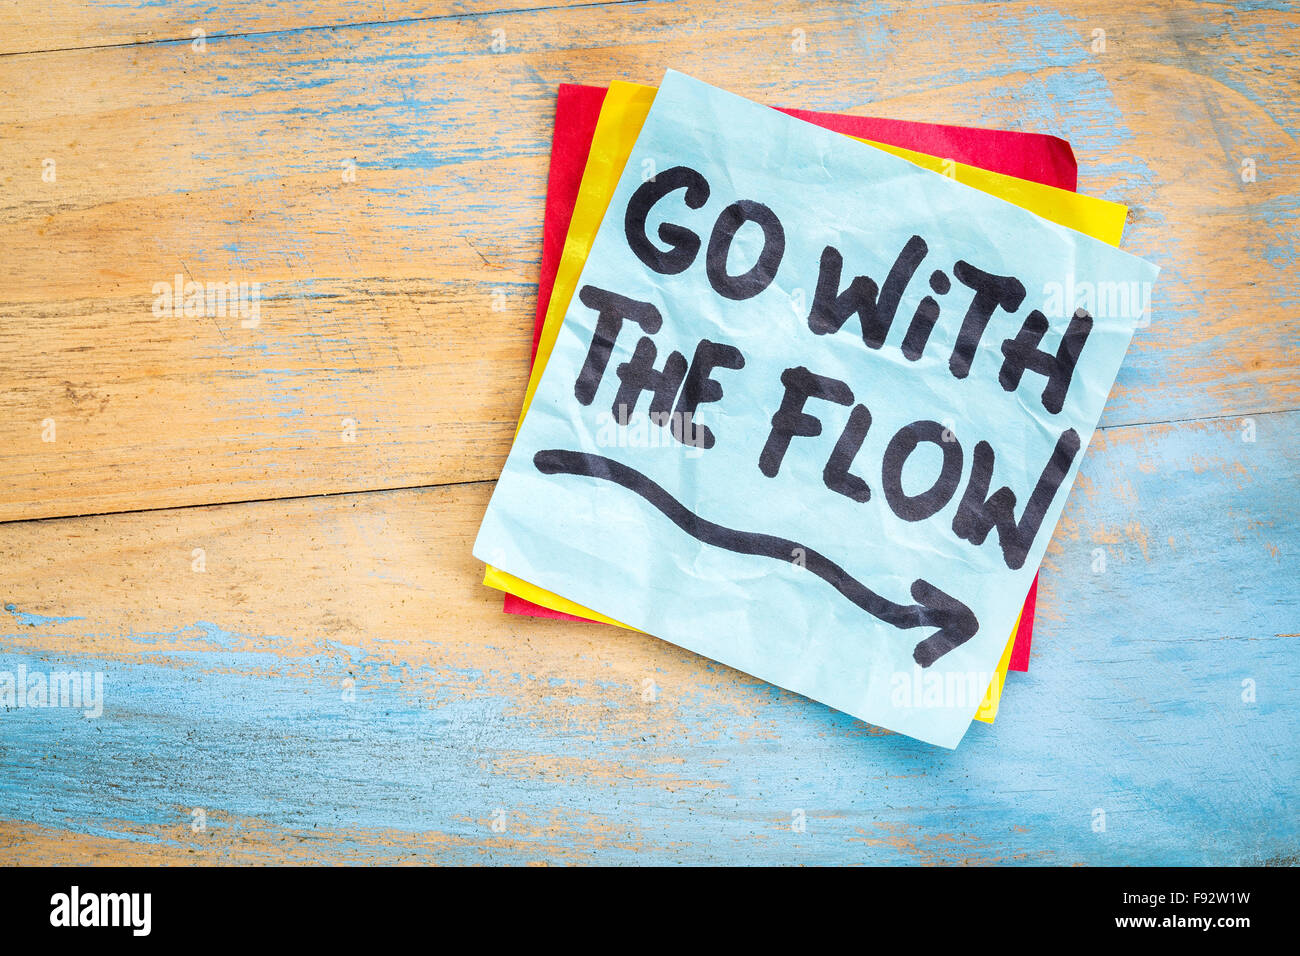 Go with the flow advice or reminder on a sticky note against grunge painted wood Stock Photo